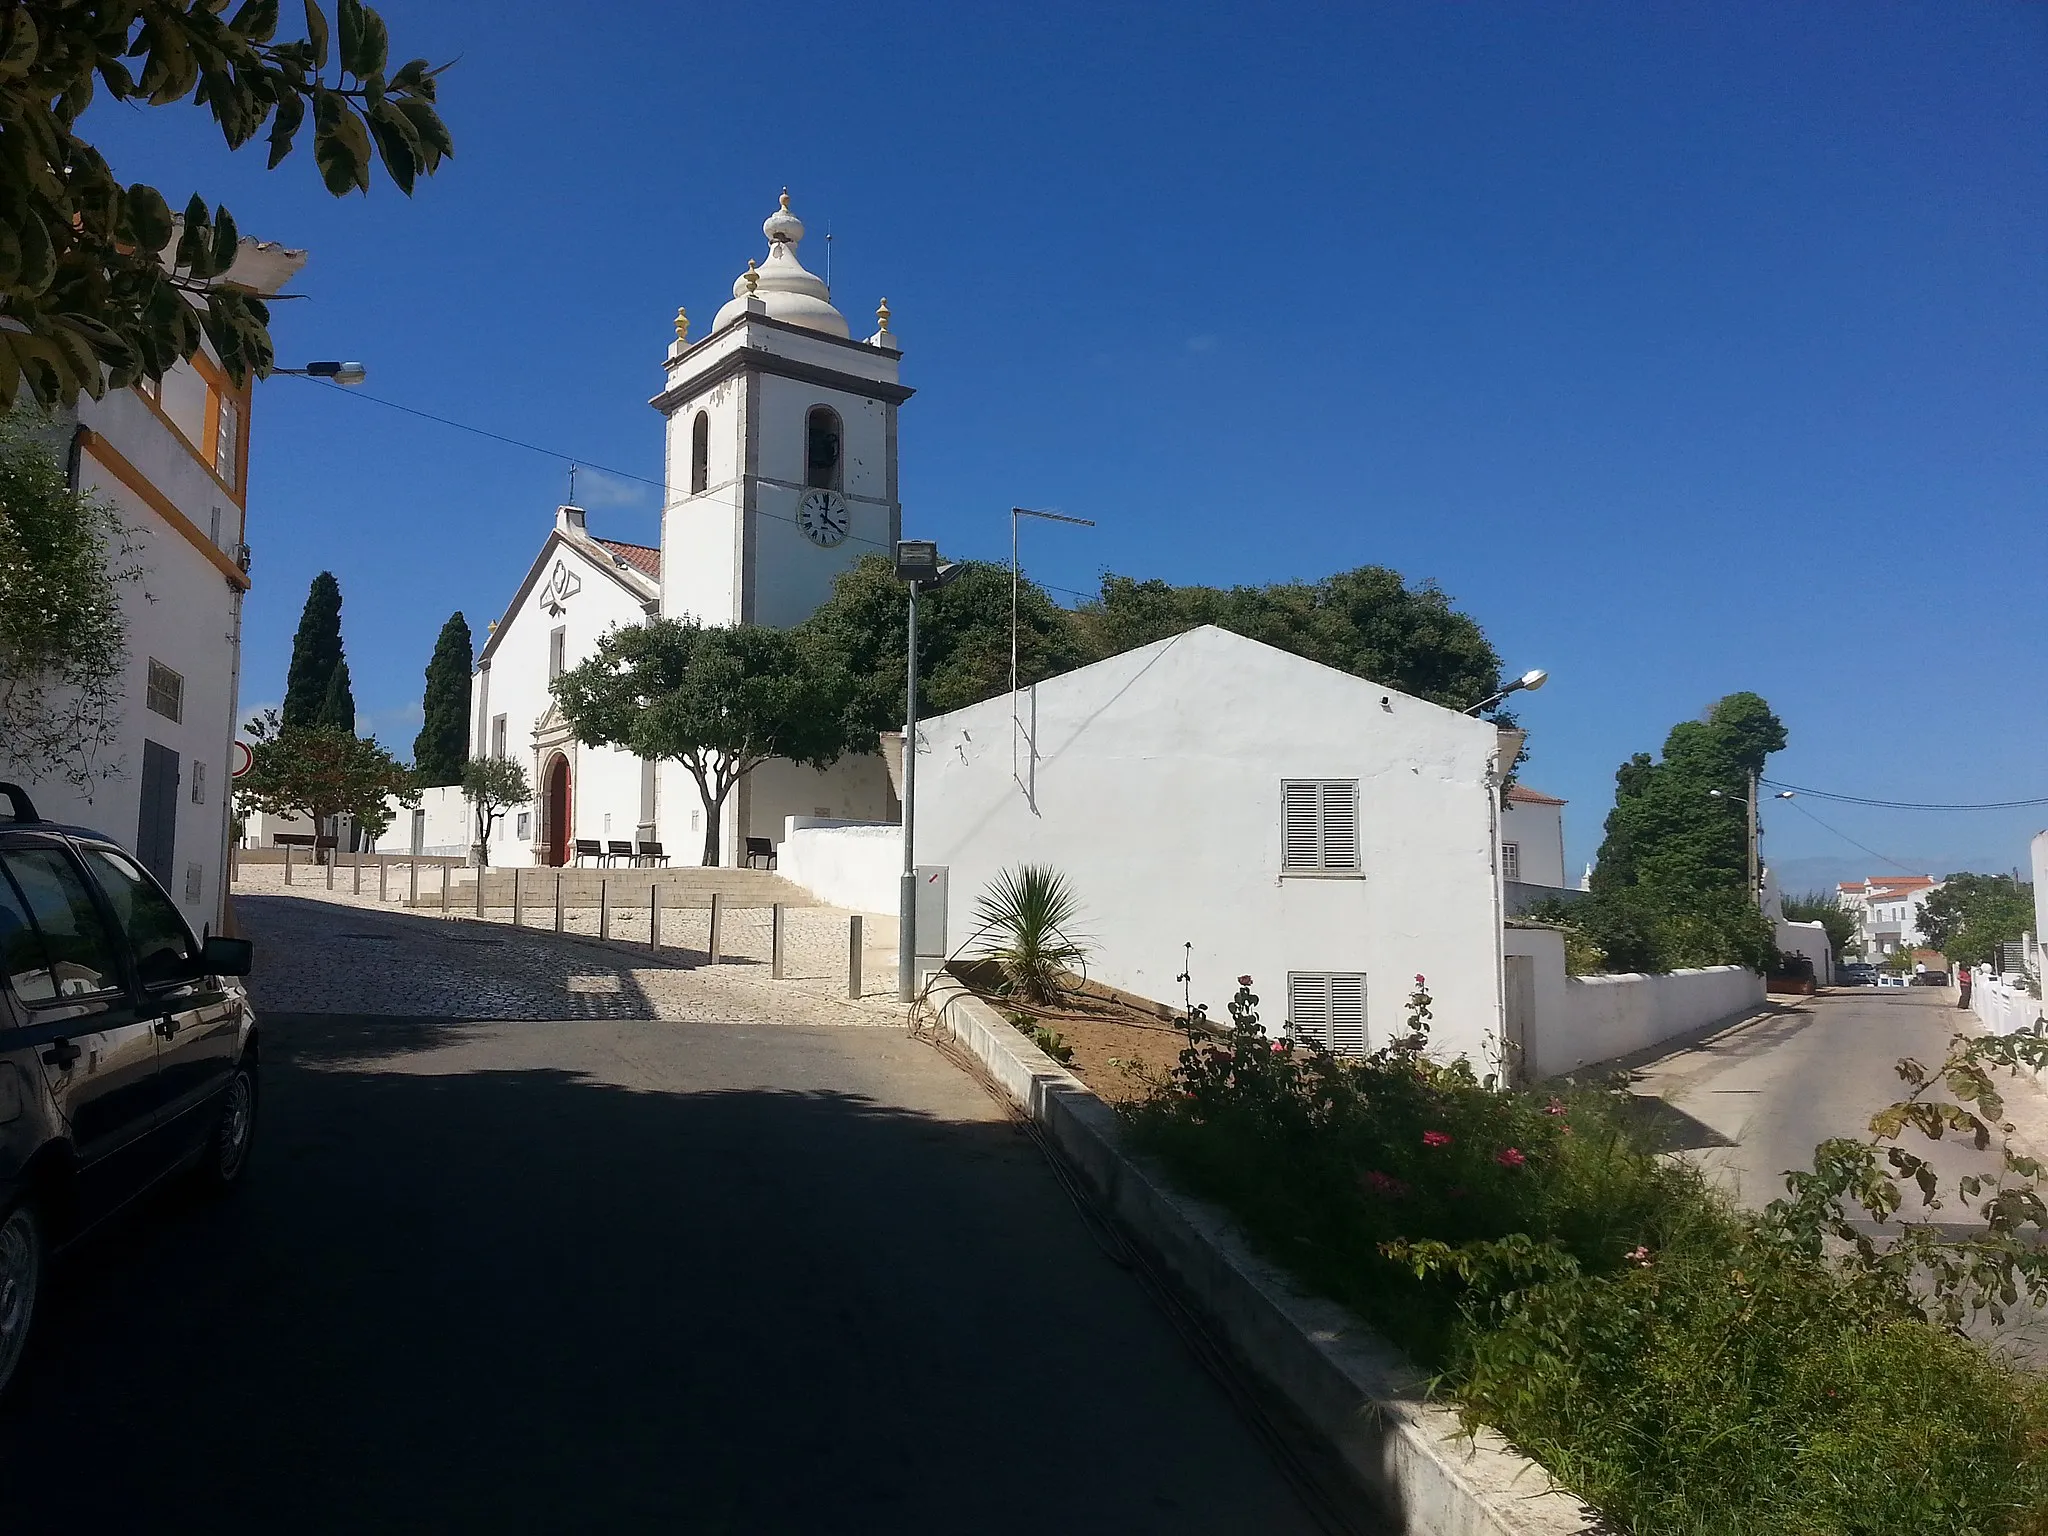 Photo showing: A view of the Church Alte Matrix or Church of Our Lady of the Assumption (Igreja Matriz de Alte ou Igreja de Nossa Senhora da Assunção) in the village of Mexilhoeira Grande, Portimão, Algarve, Portugal. The church dates from the 16 century and is built in the Renaissance style, Inside the church there are sevral notable examples of Altarpieces.